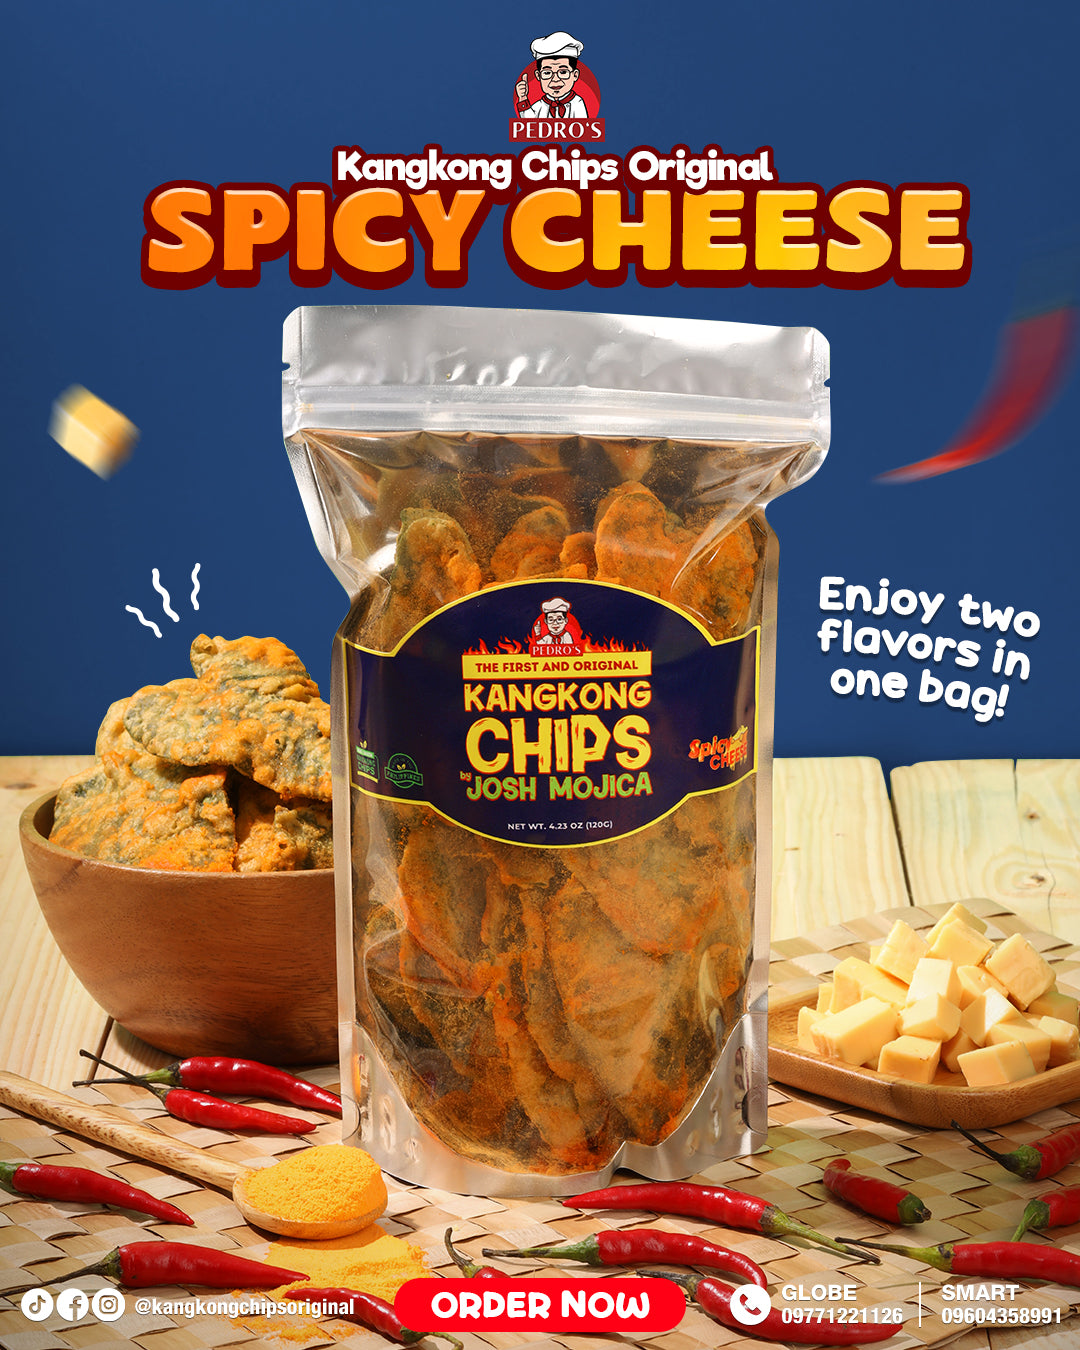 SPICY CHEESE